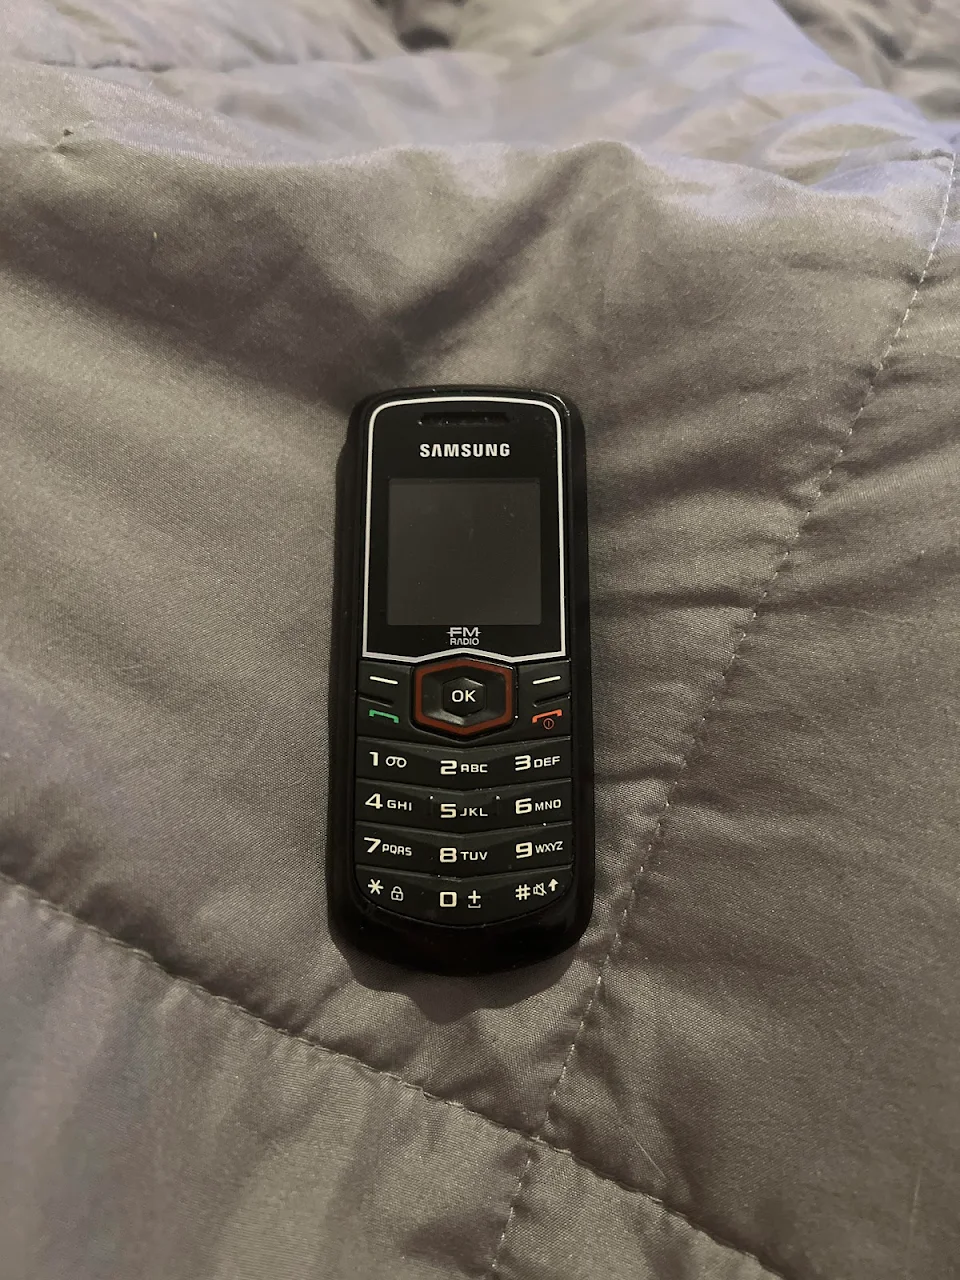 Found an ancient relic of the past  this was my very first cell phone